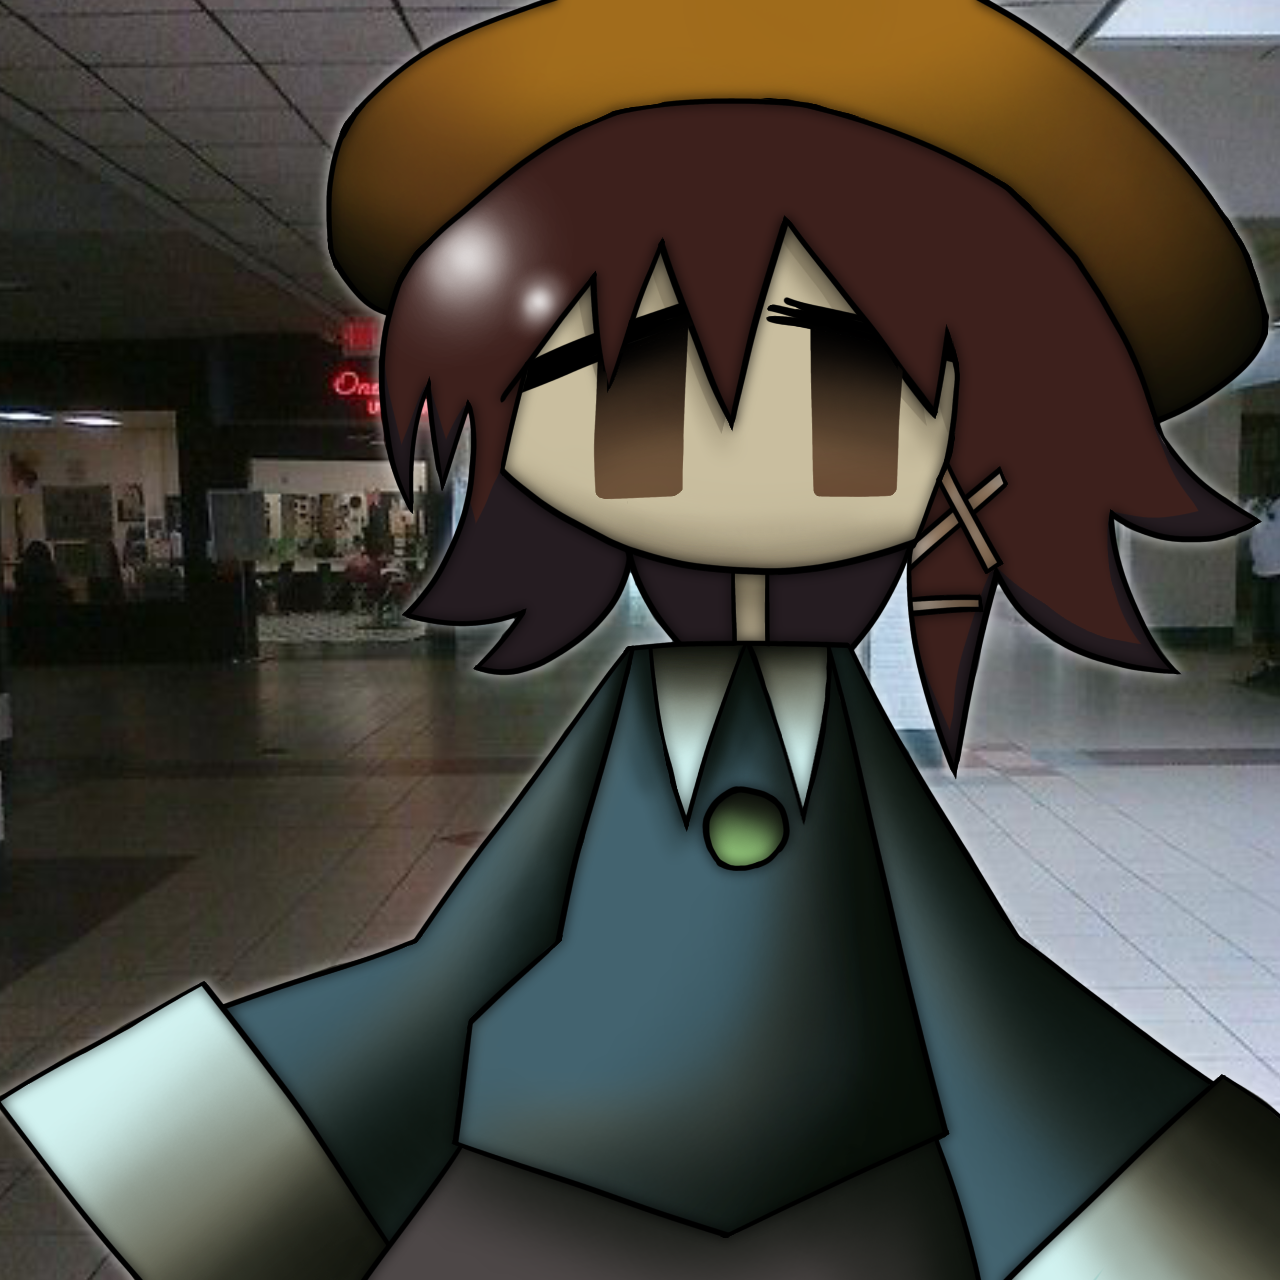 lain exploring an abandoned mall i guess